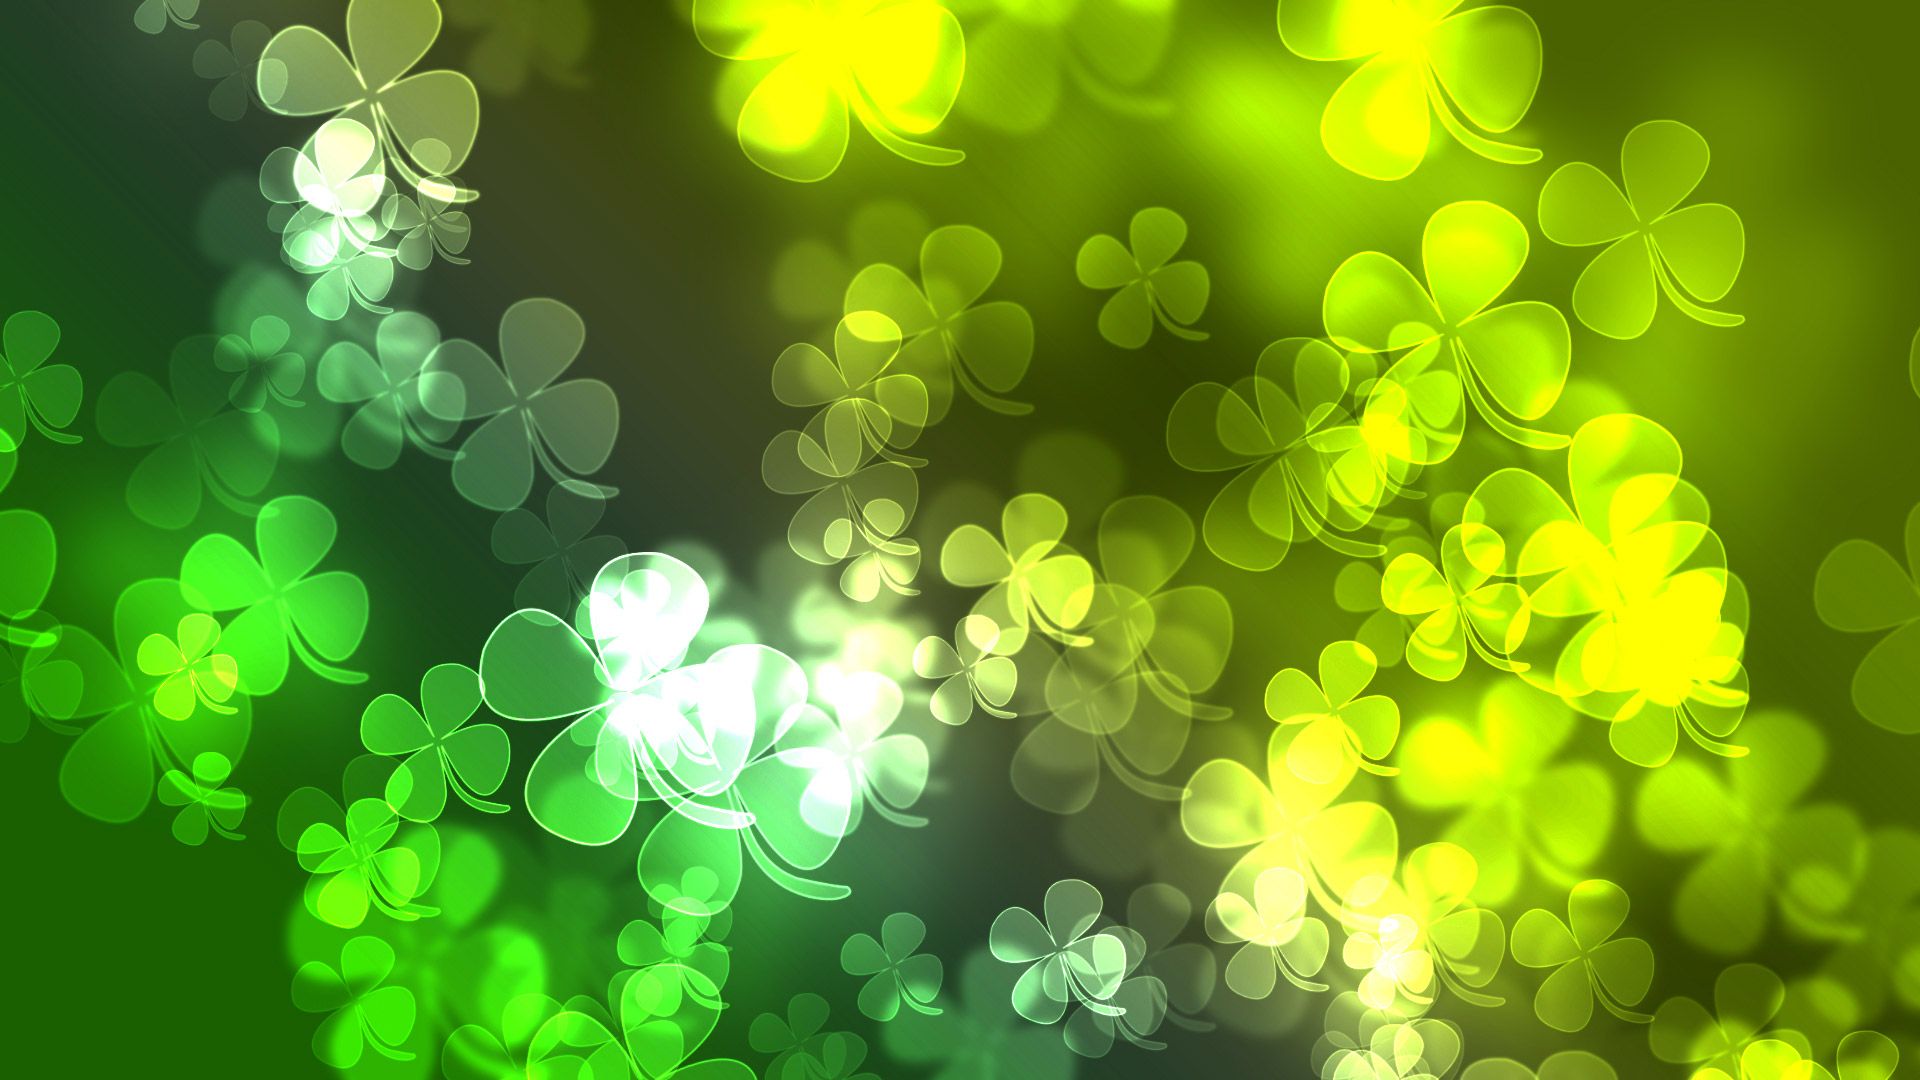 23 St. Patrick's Day themed wallpapers for your Android